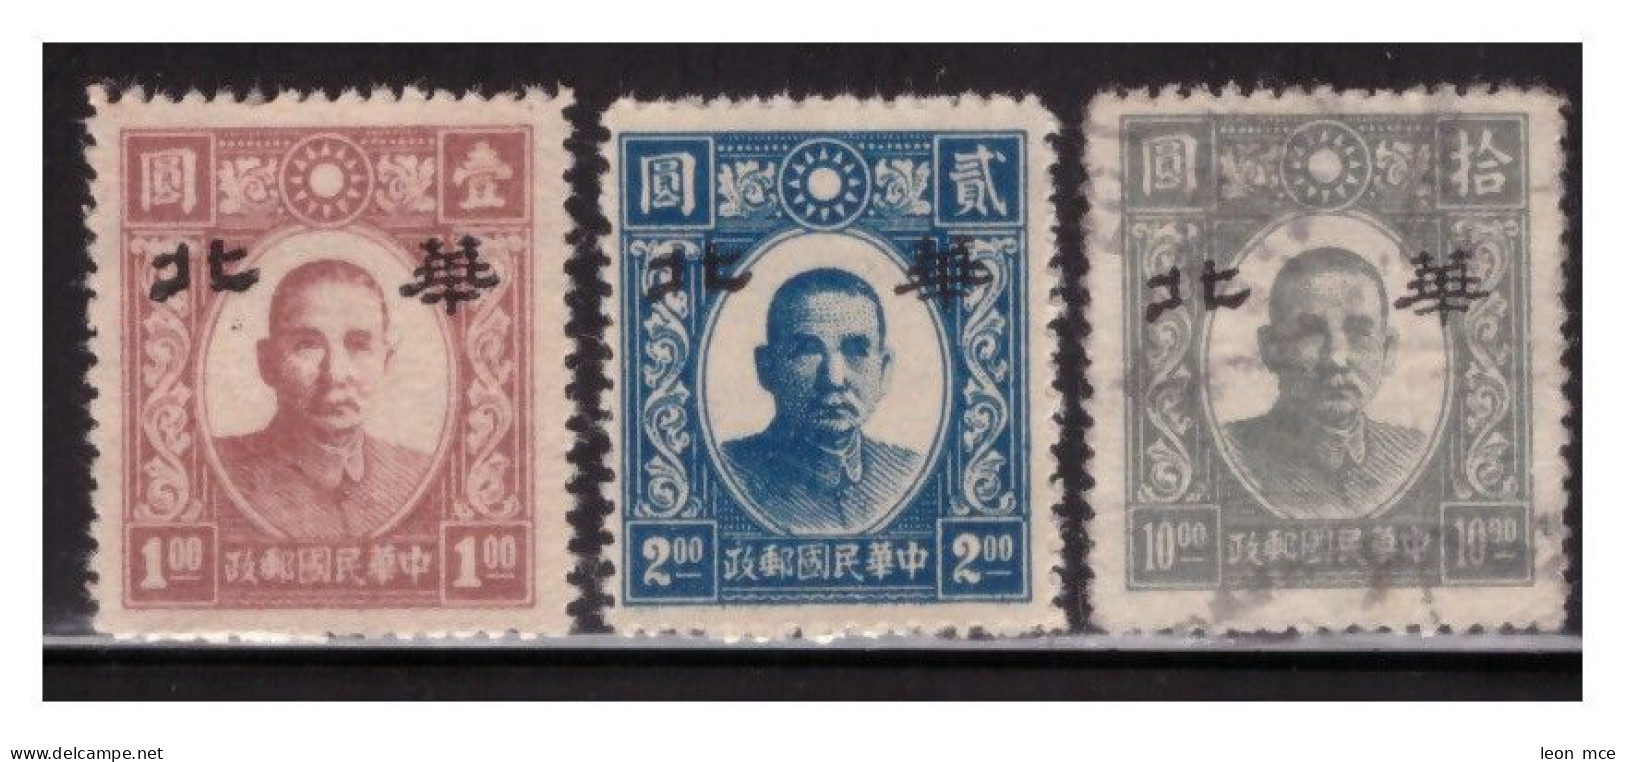 1945 CHINA NORTH "HWA PEI" Dr. SUN YAT-SEN, WITHOUT Overprint Are Proofs STAMPS (3) - 1941-45 Cina Del Nord